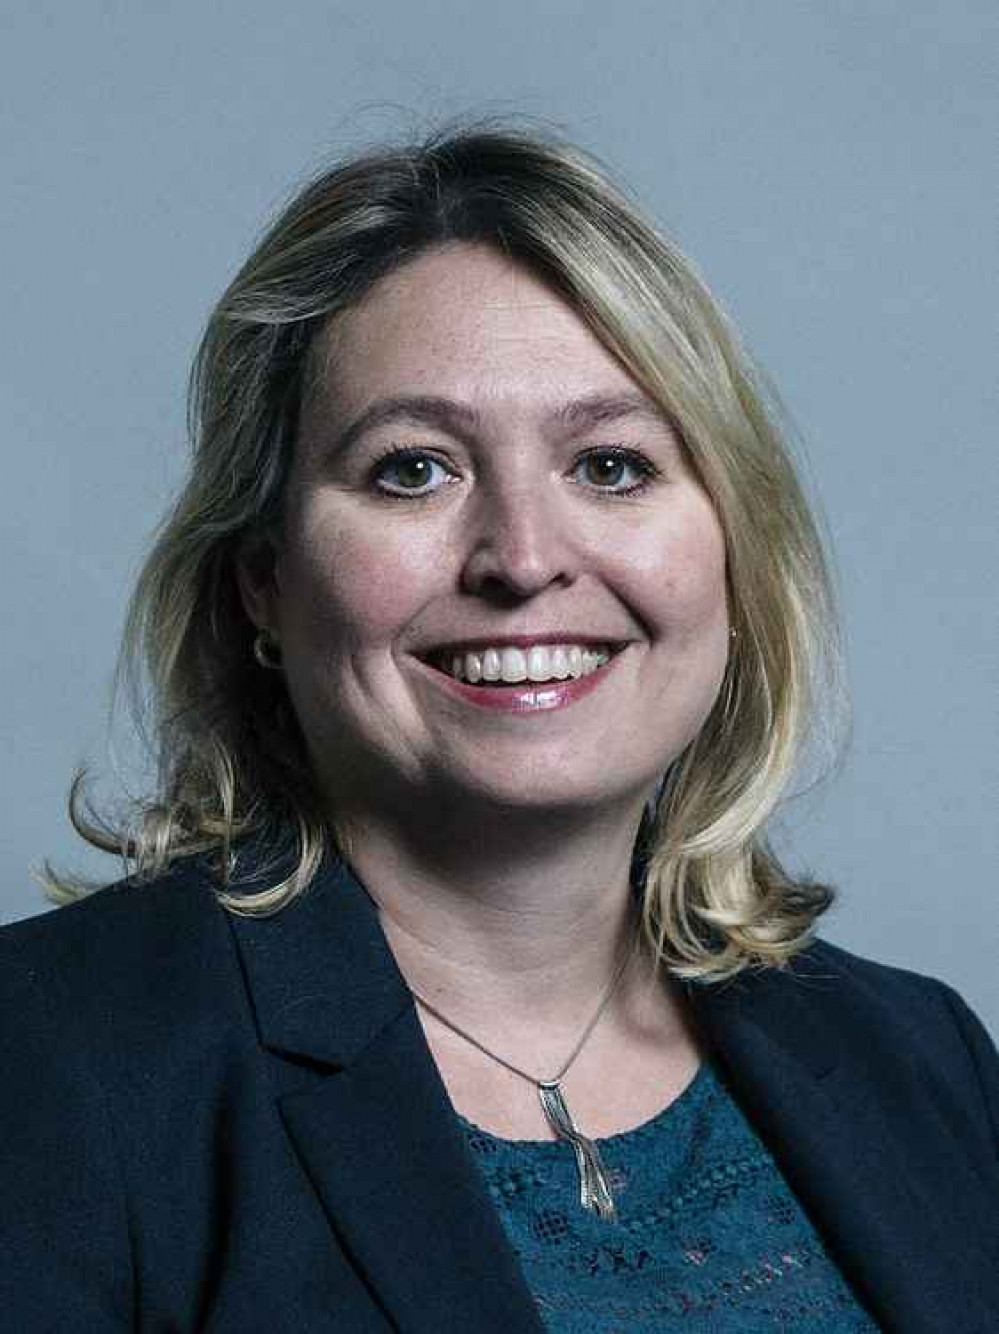 Karen Bradley has served as Member of Parliament for Staffordshire Moorlands since 2010. The 51-year-old Conservative is a keen supporter of Biddulph Nub News.